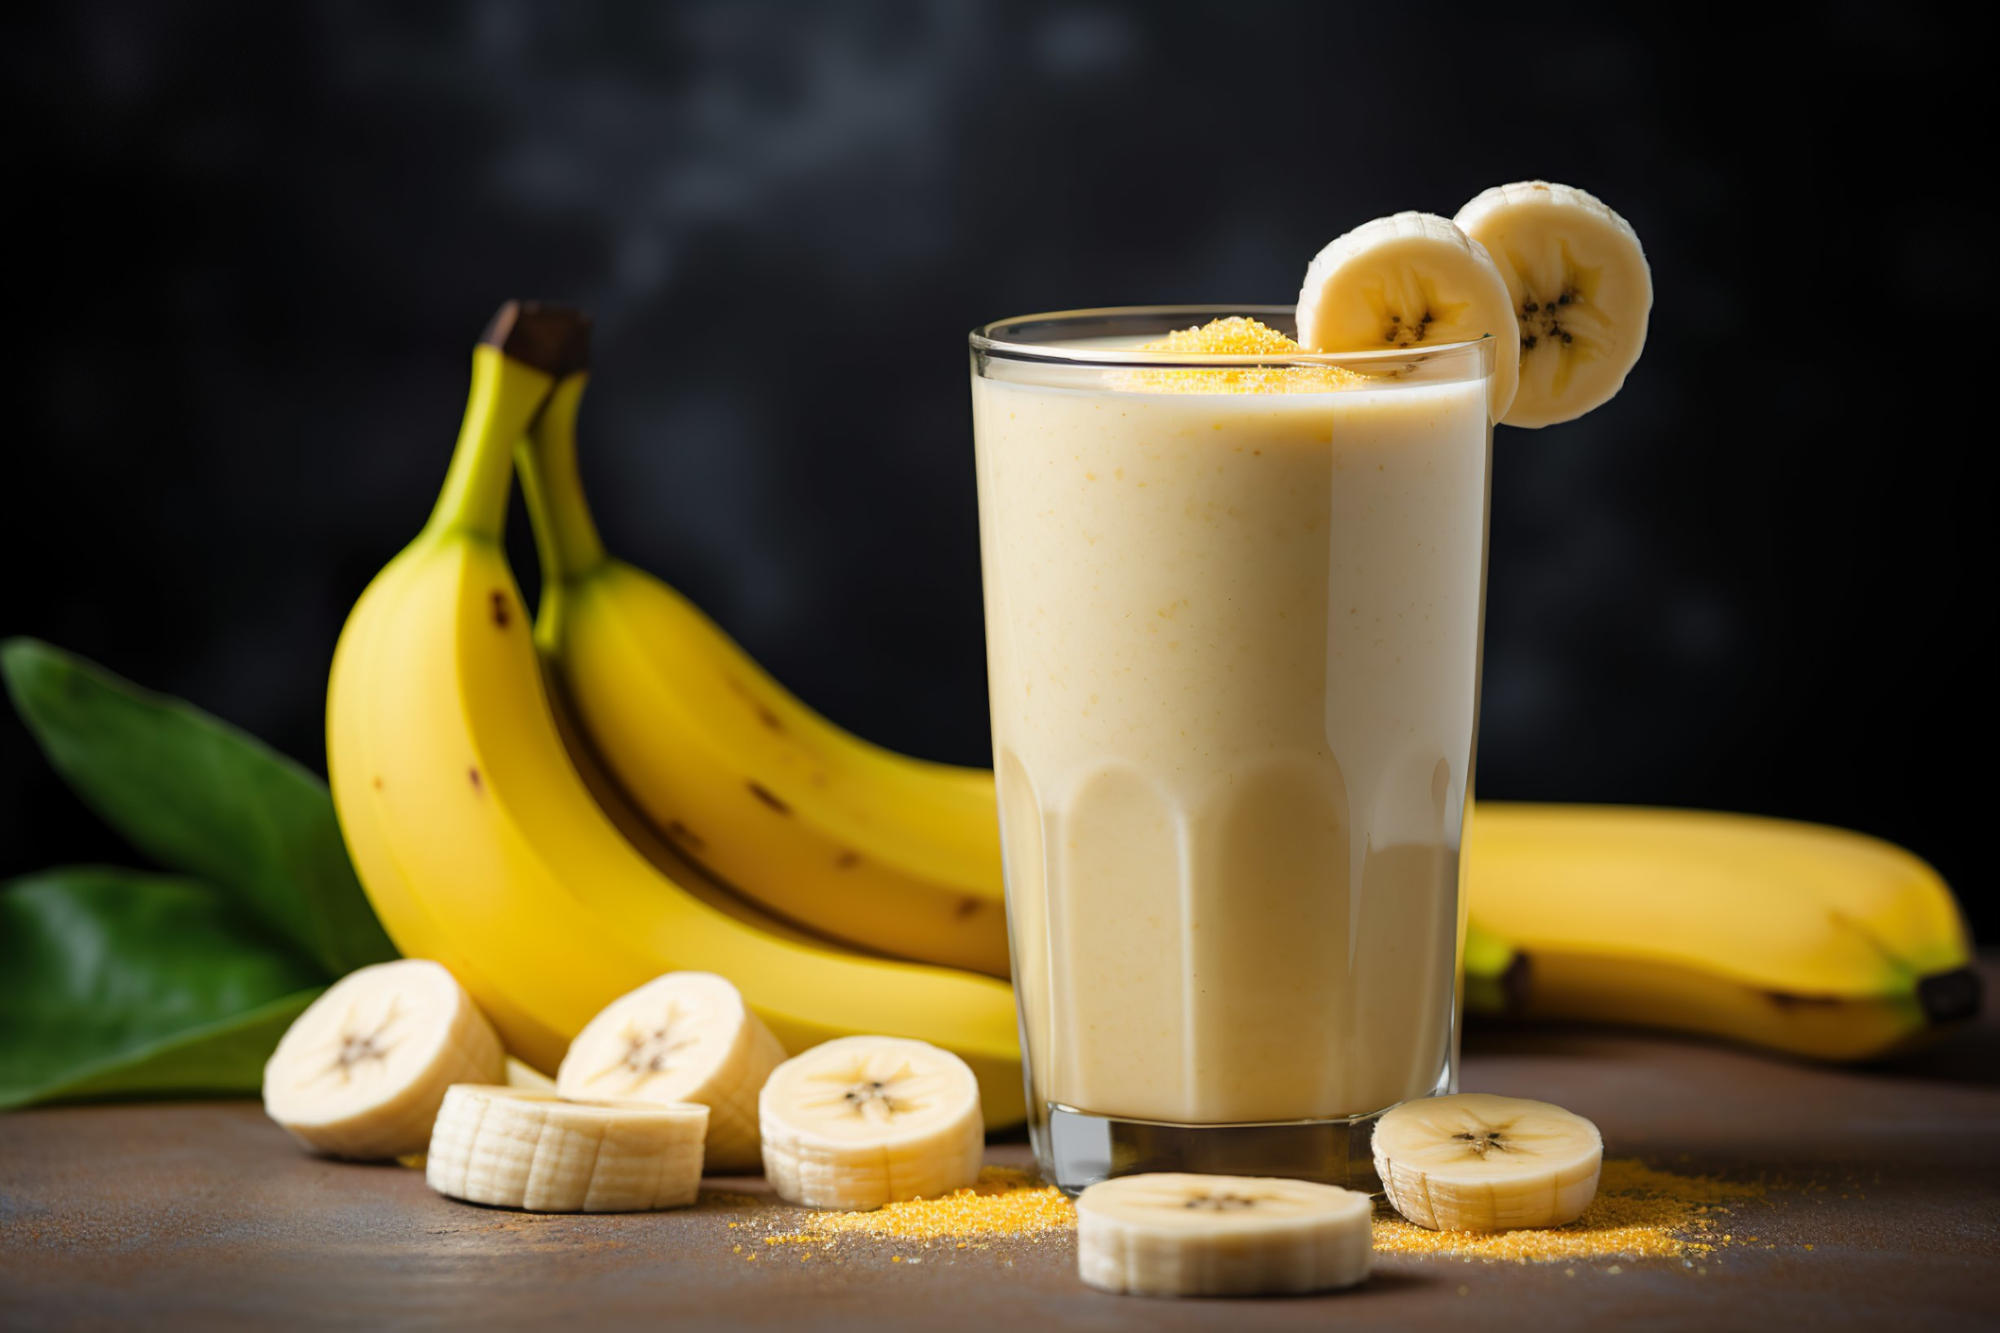 Cream of Wheat - Are you bananas for bananas? Then you'll love our